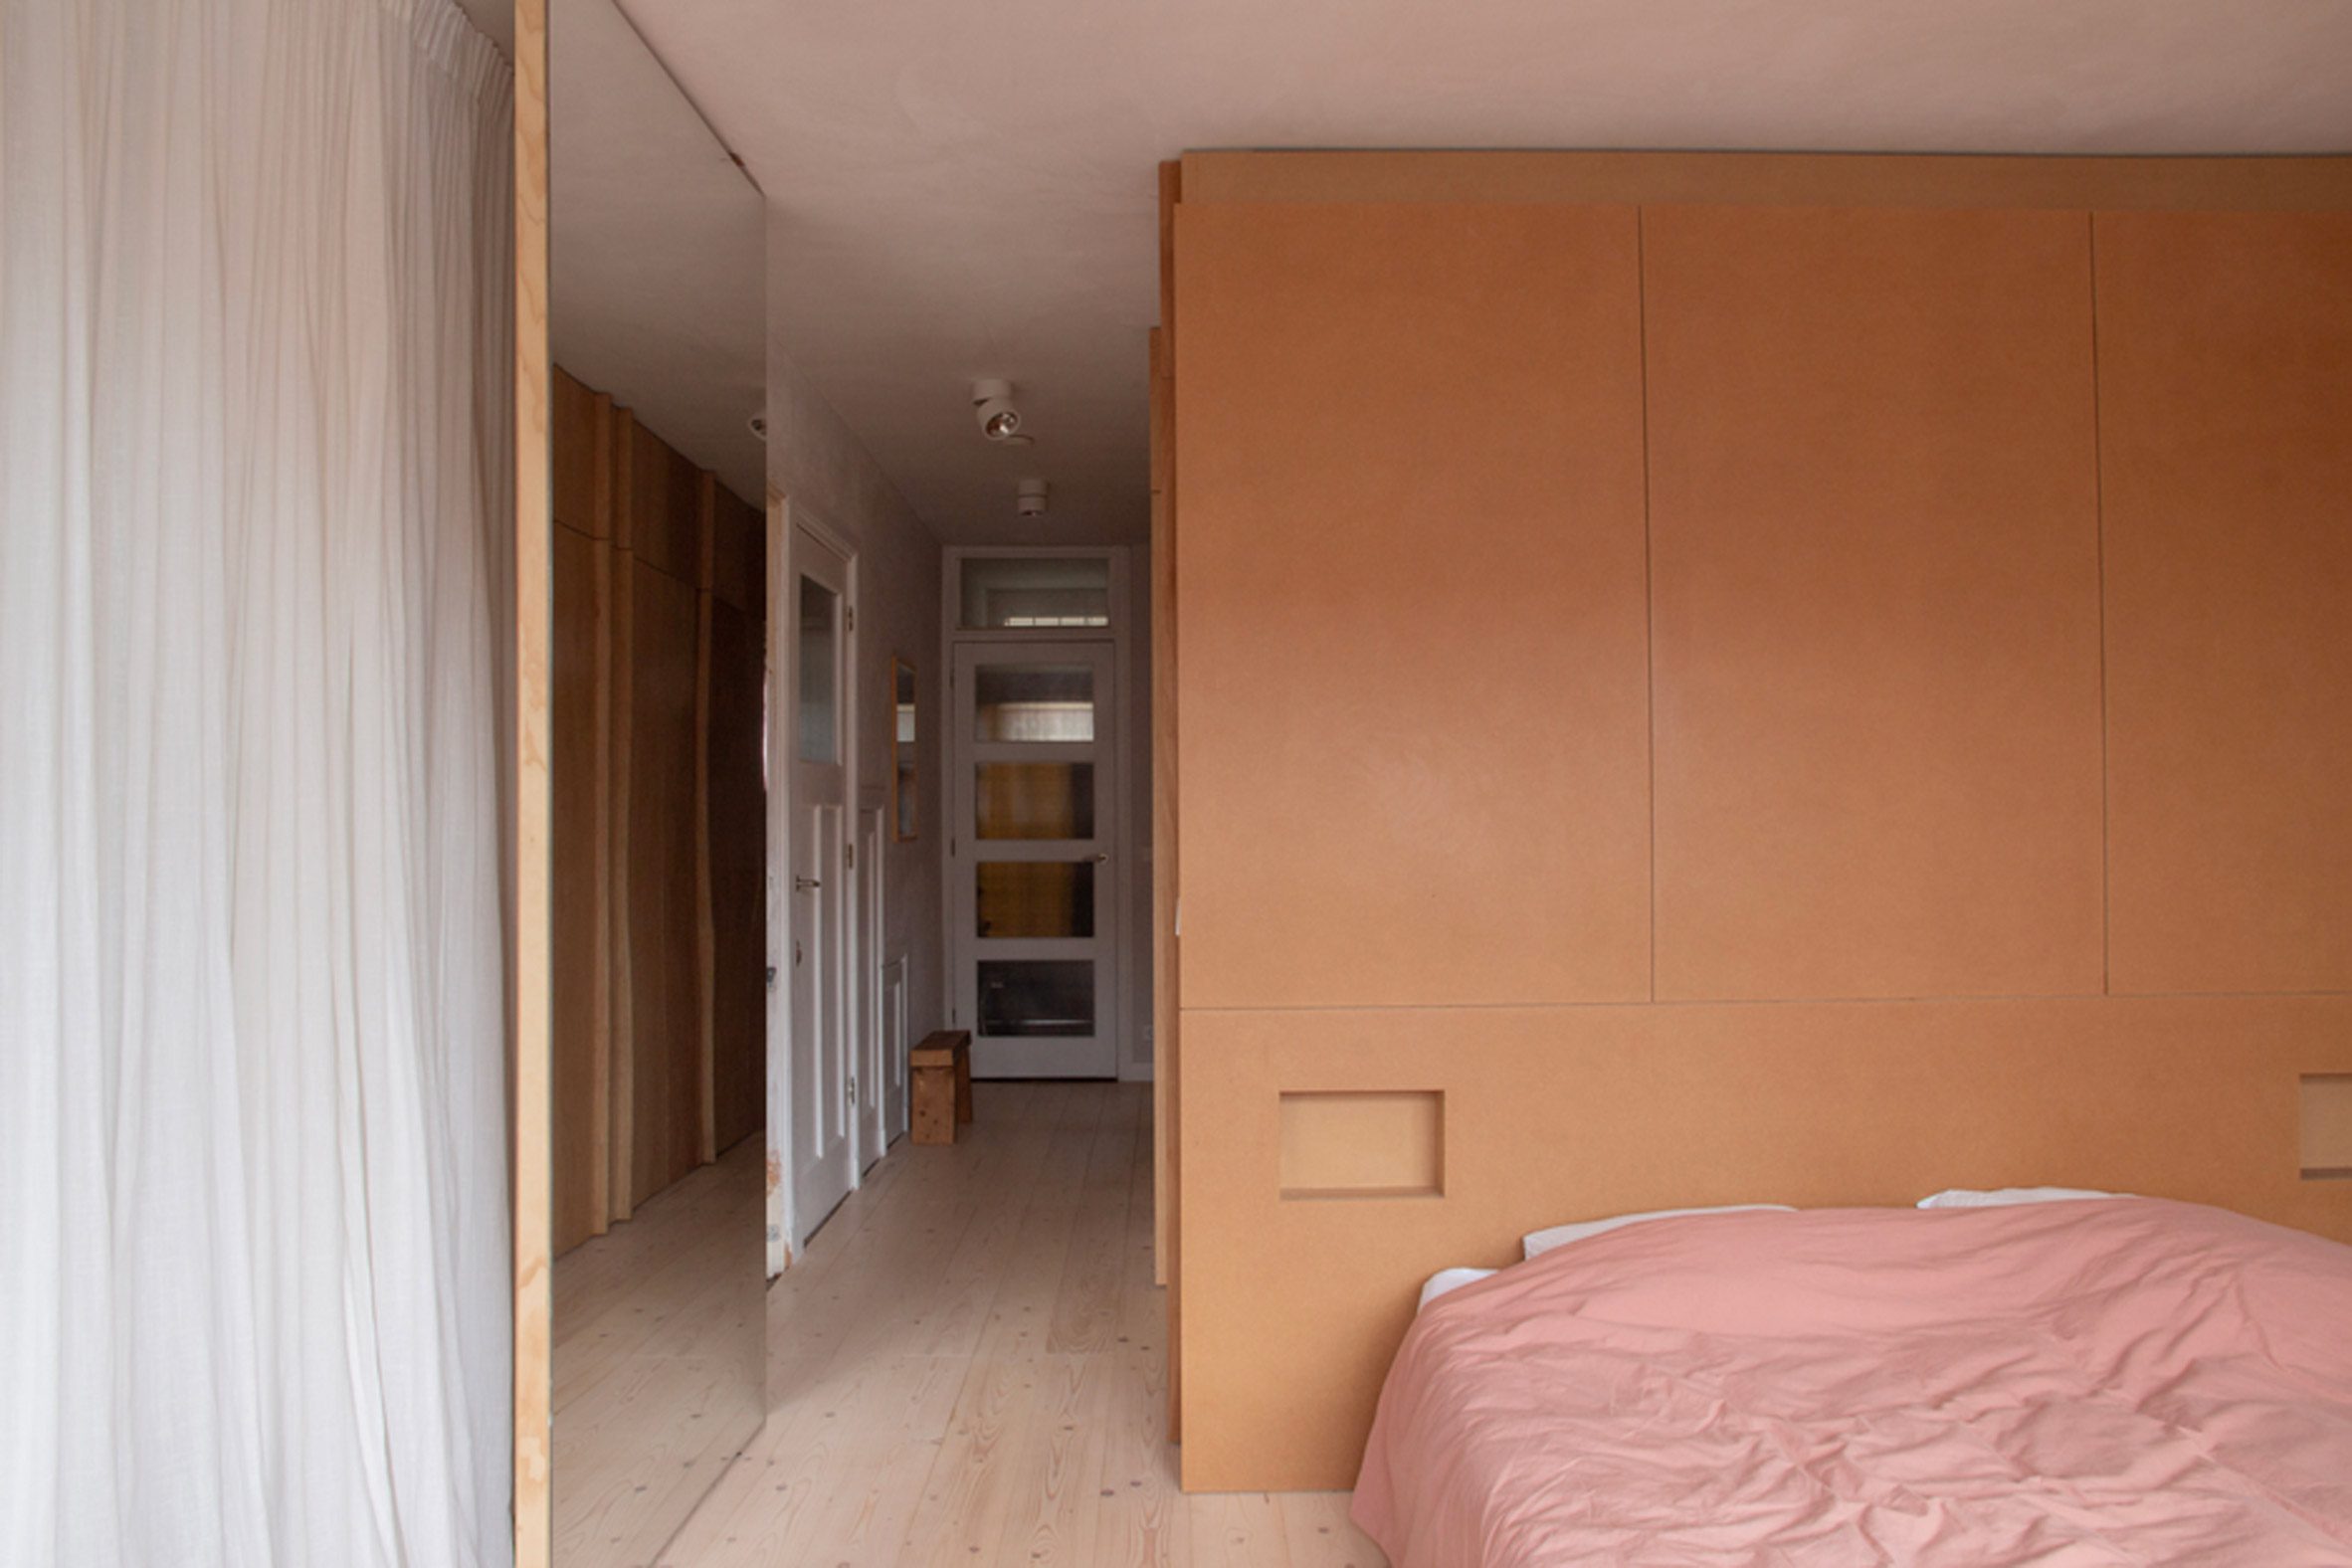 Bedroom unit in Ulli Heckmann's compact apartment in Rotterdam